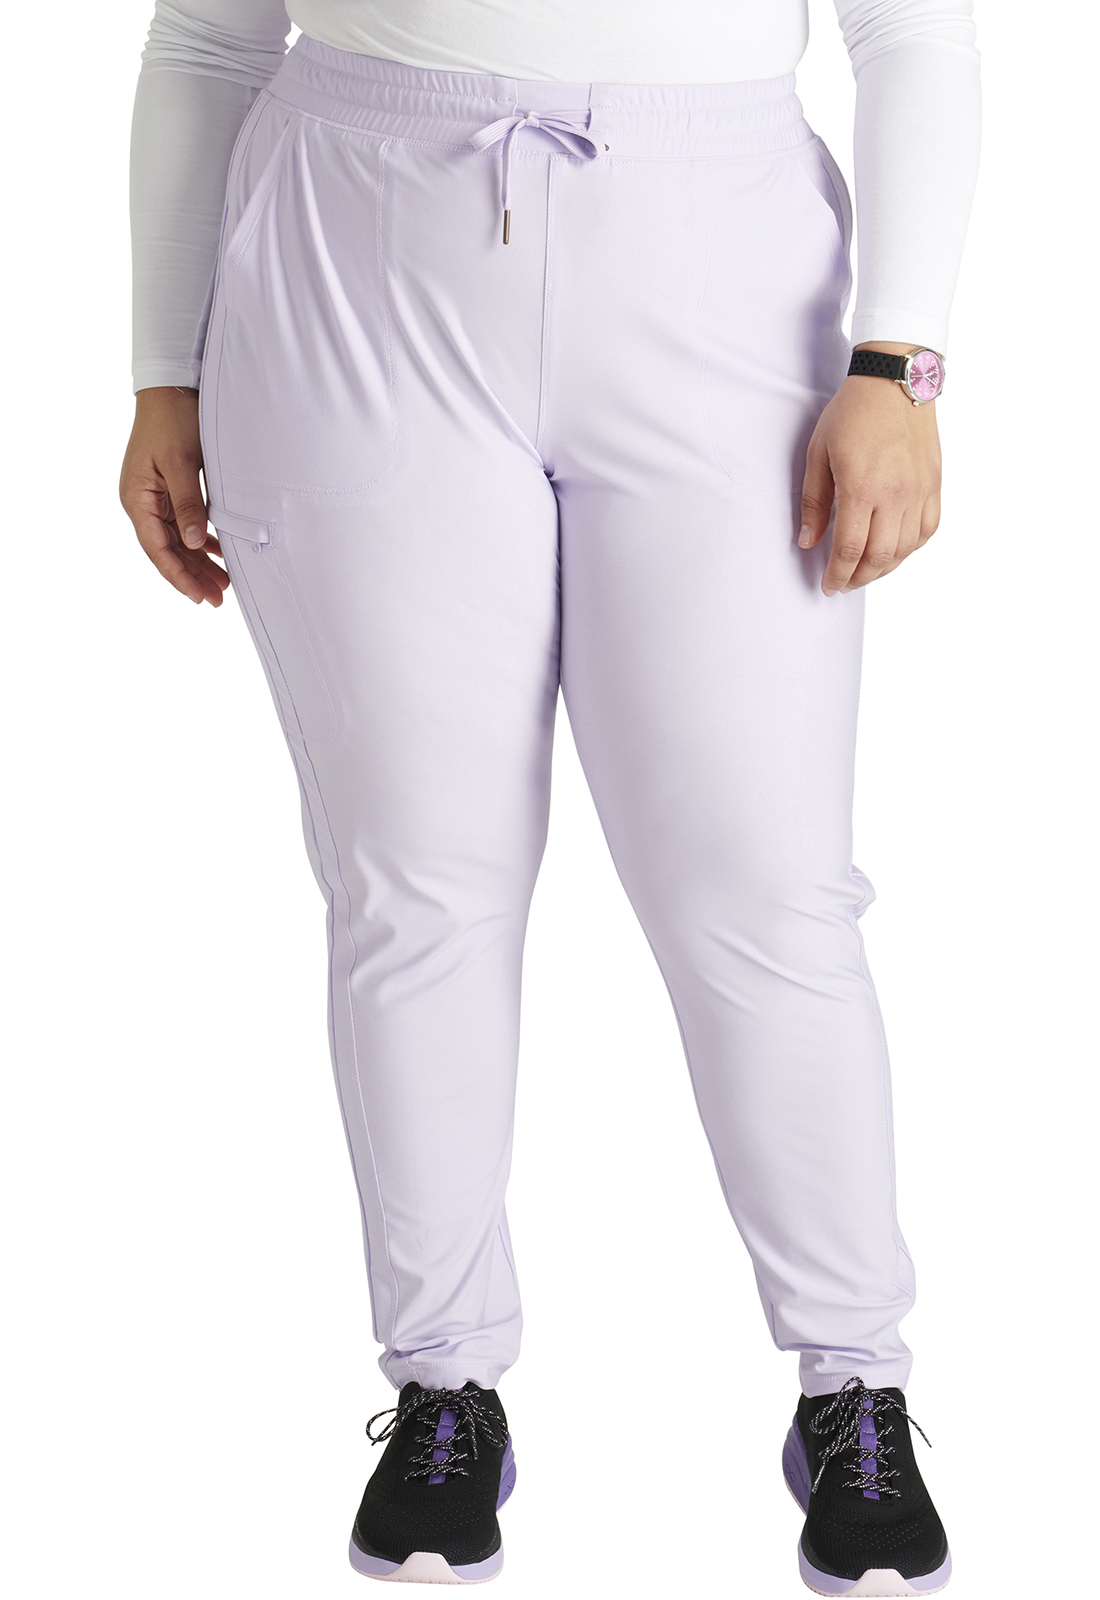 aent- Ladies Mid Rise Tapered Leg Drawstring Pant - Wicked Smart Apparel